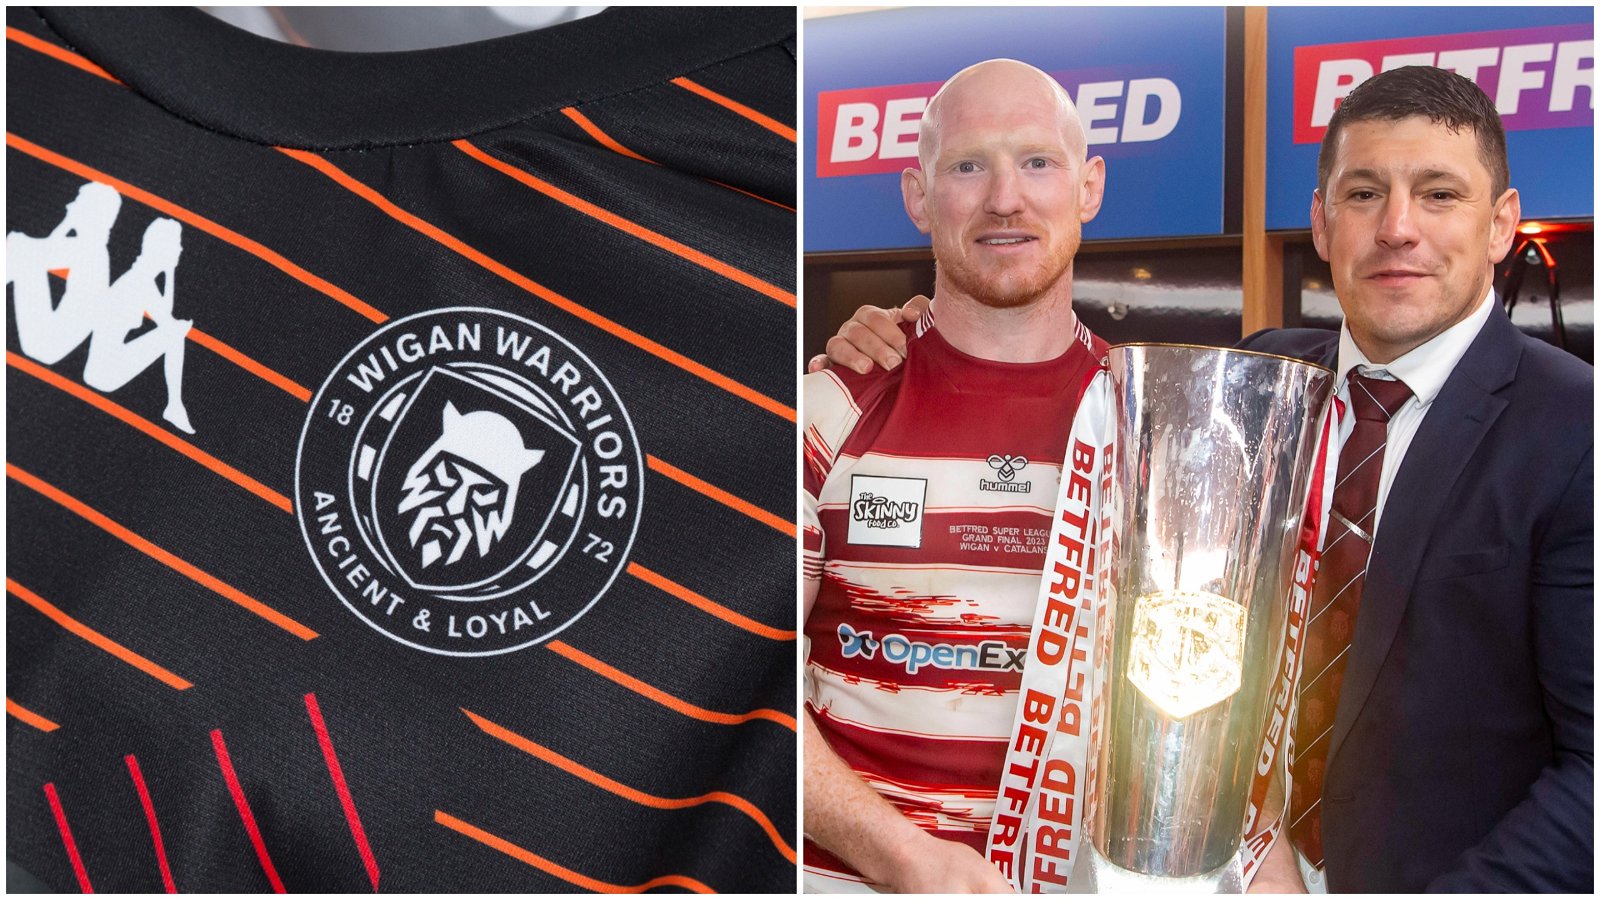 Wigan Warriors kit, captain and head coach